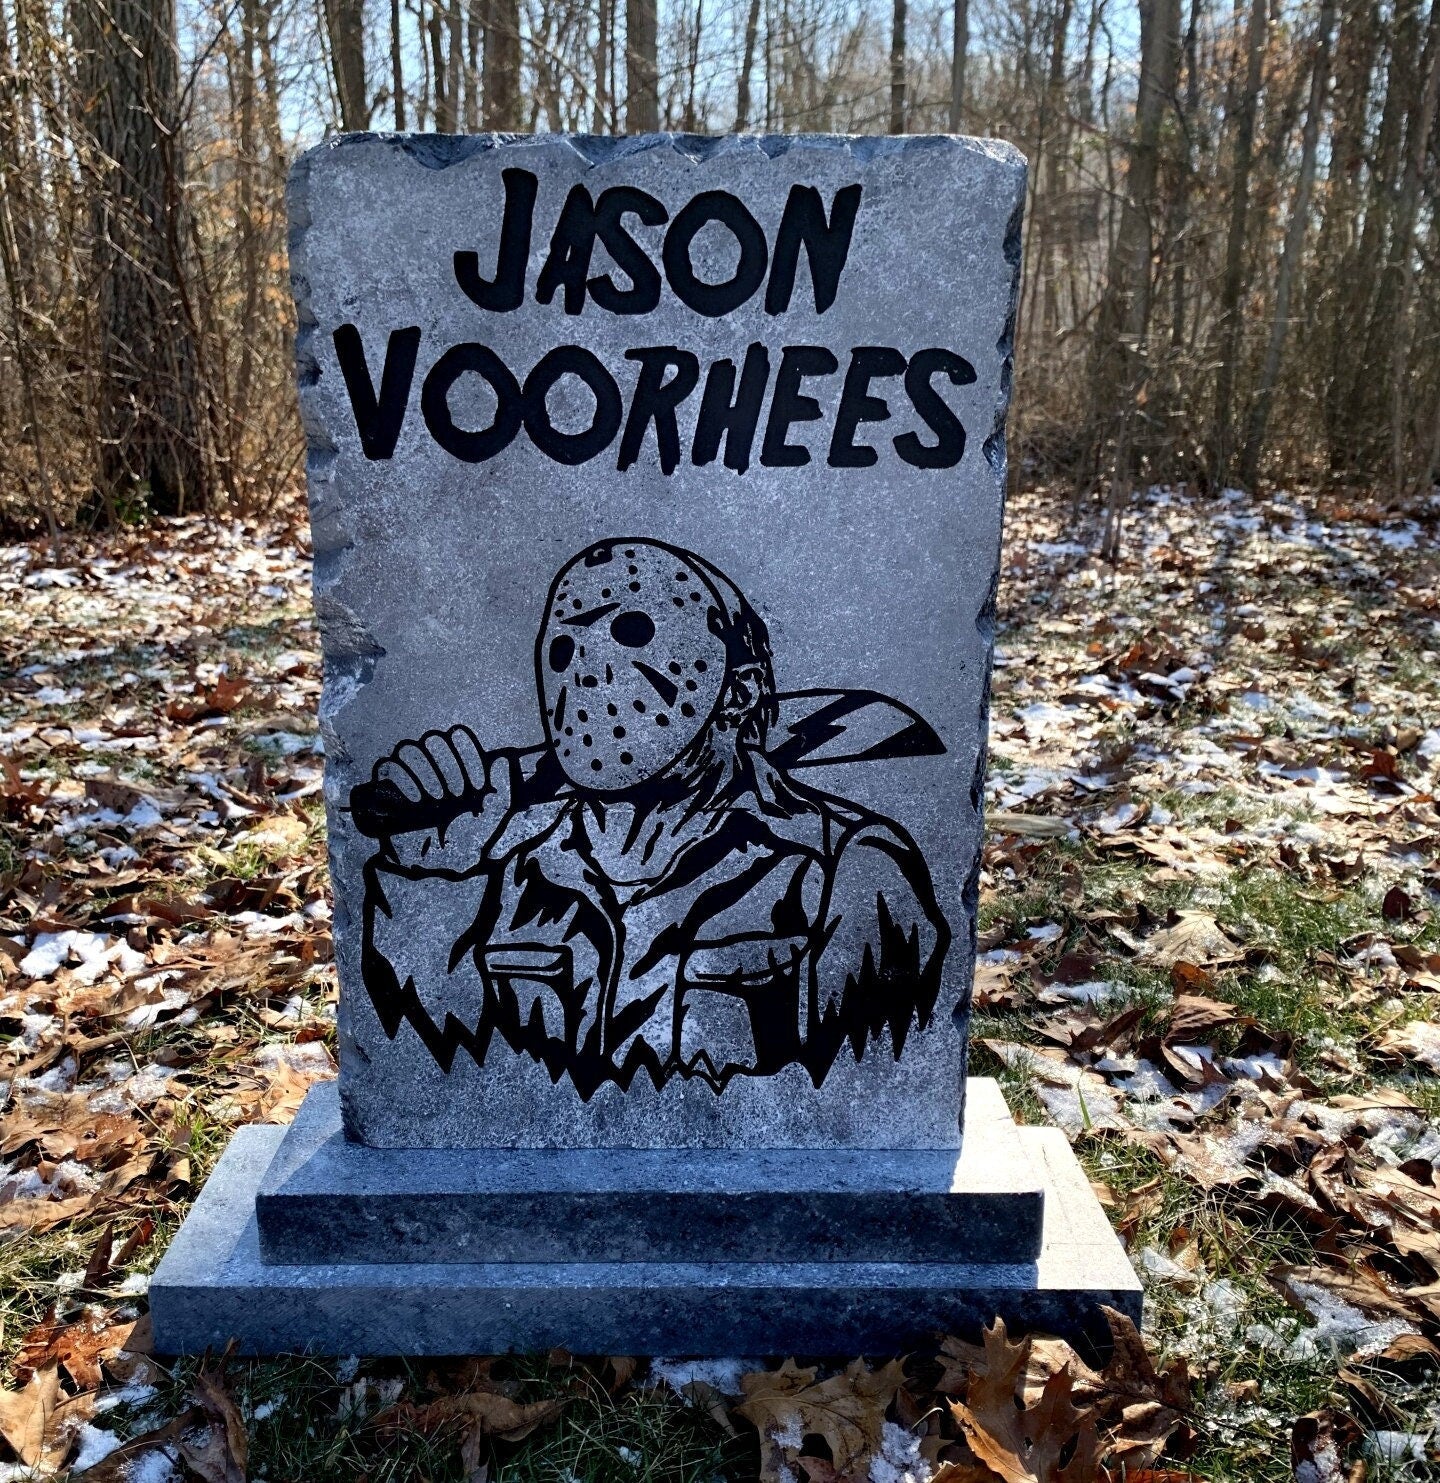 Jason Voorhees Friday the 13th Halloween Character Tombstone